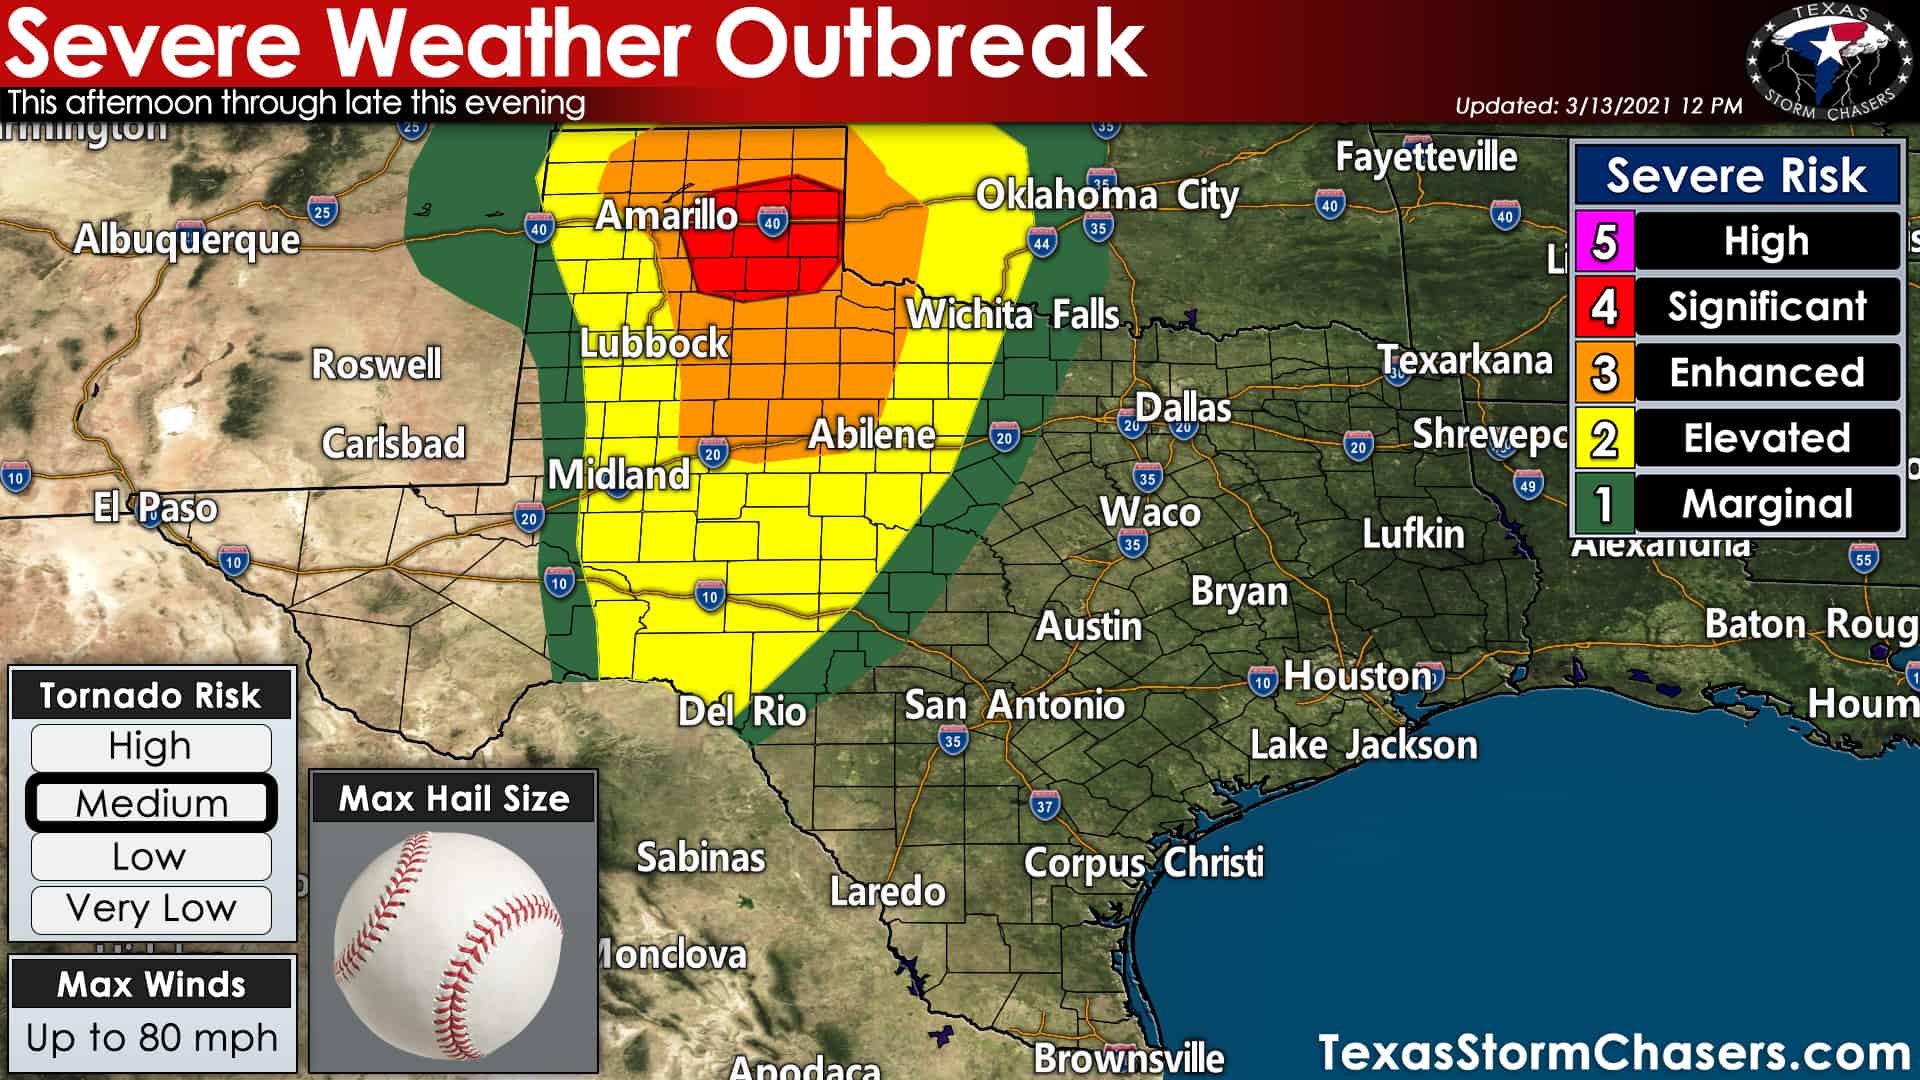 Significant Severe Weather Outbreak Likely Today in West Texas & Texas Panhandle